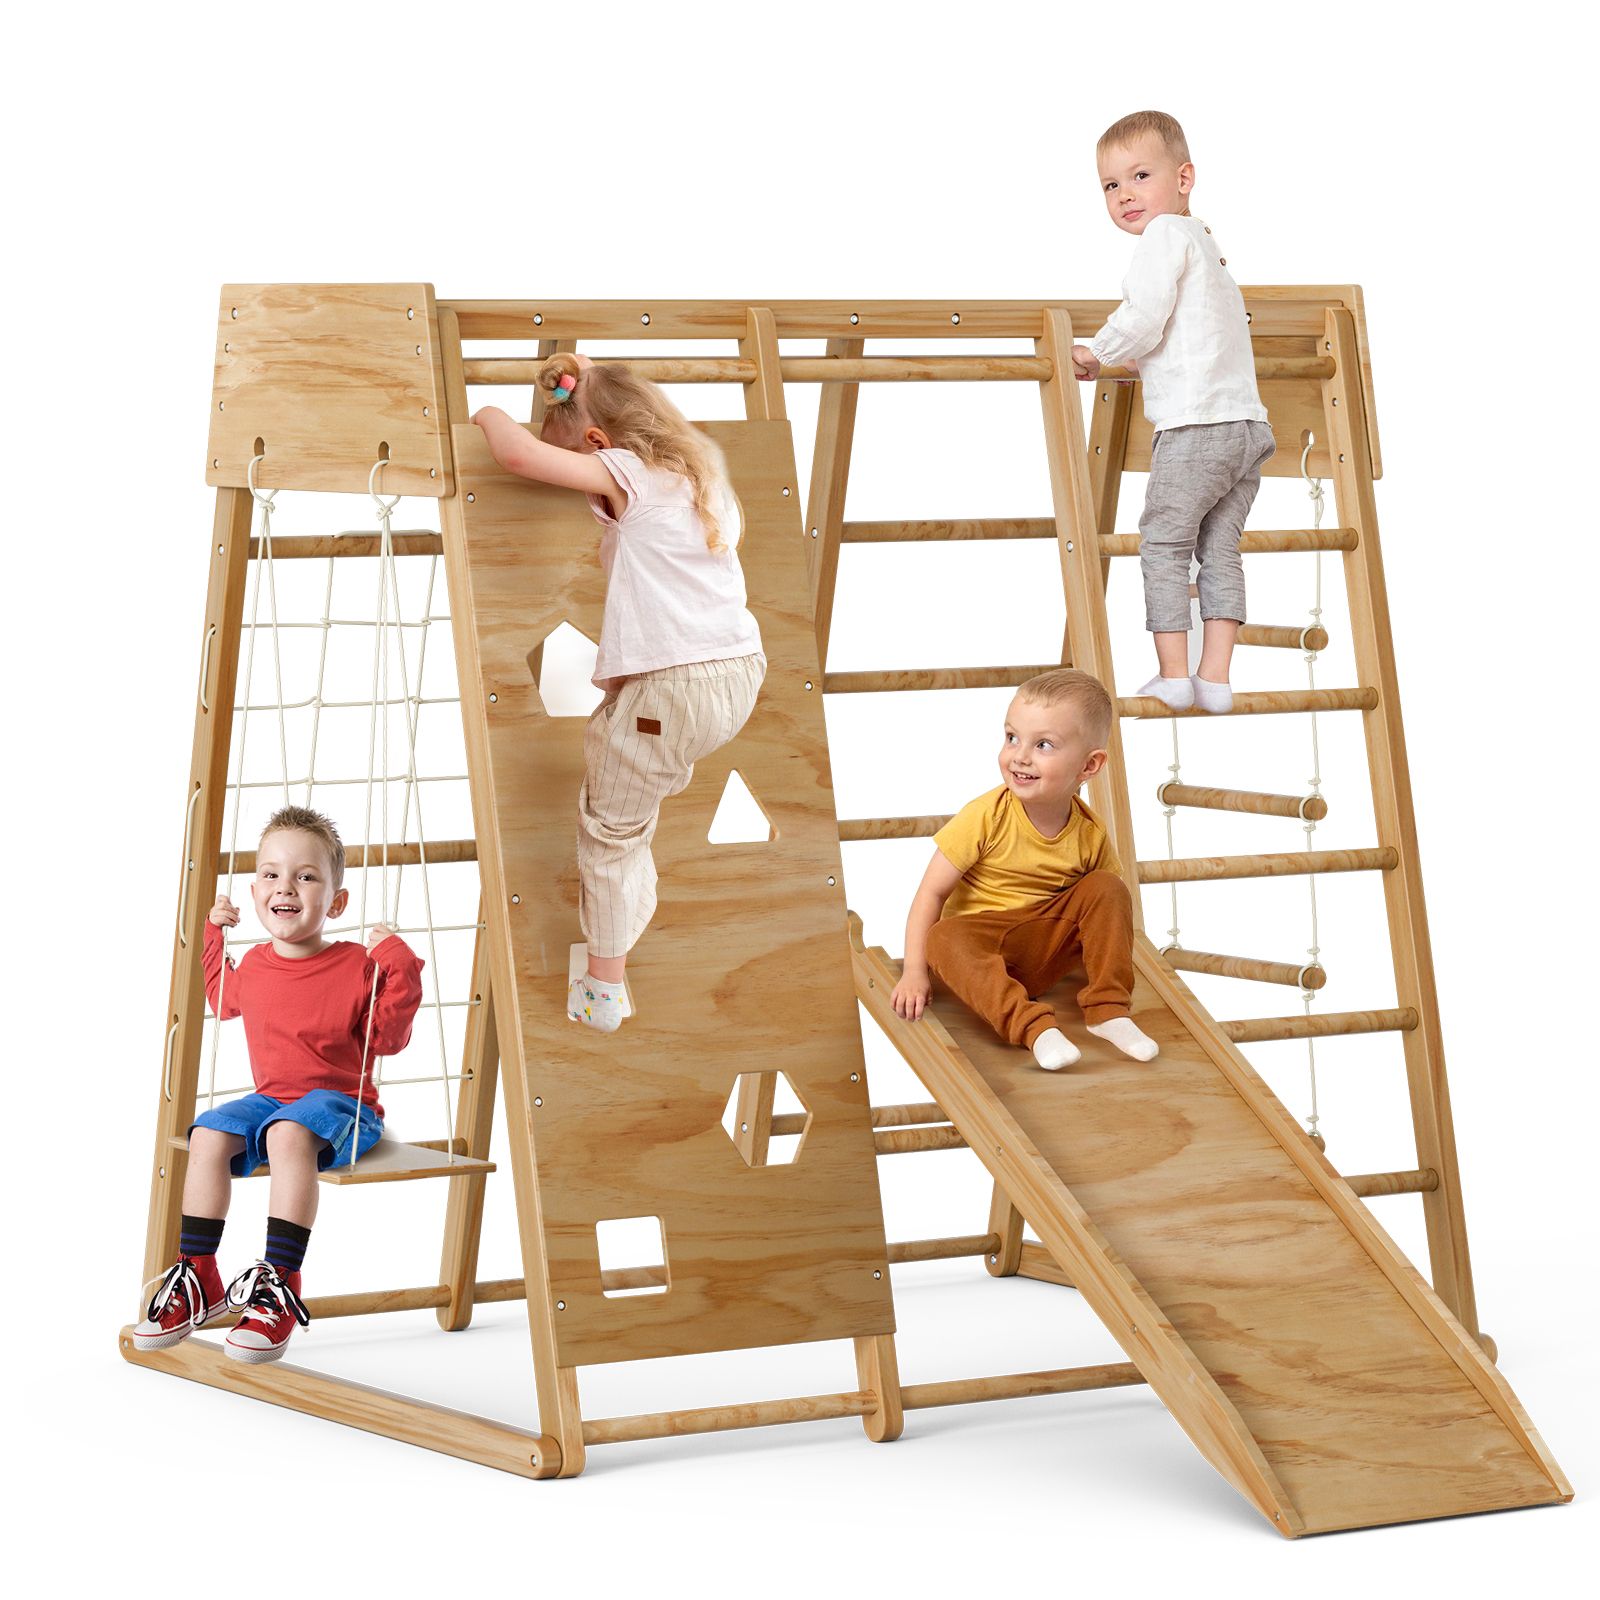 GIKPAL 8-in-1  Wooden Indoor Kids Playground Jungle Gym with Slide, Toddlers Wooden Climber with ... | Walmart (US)